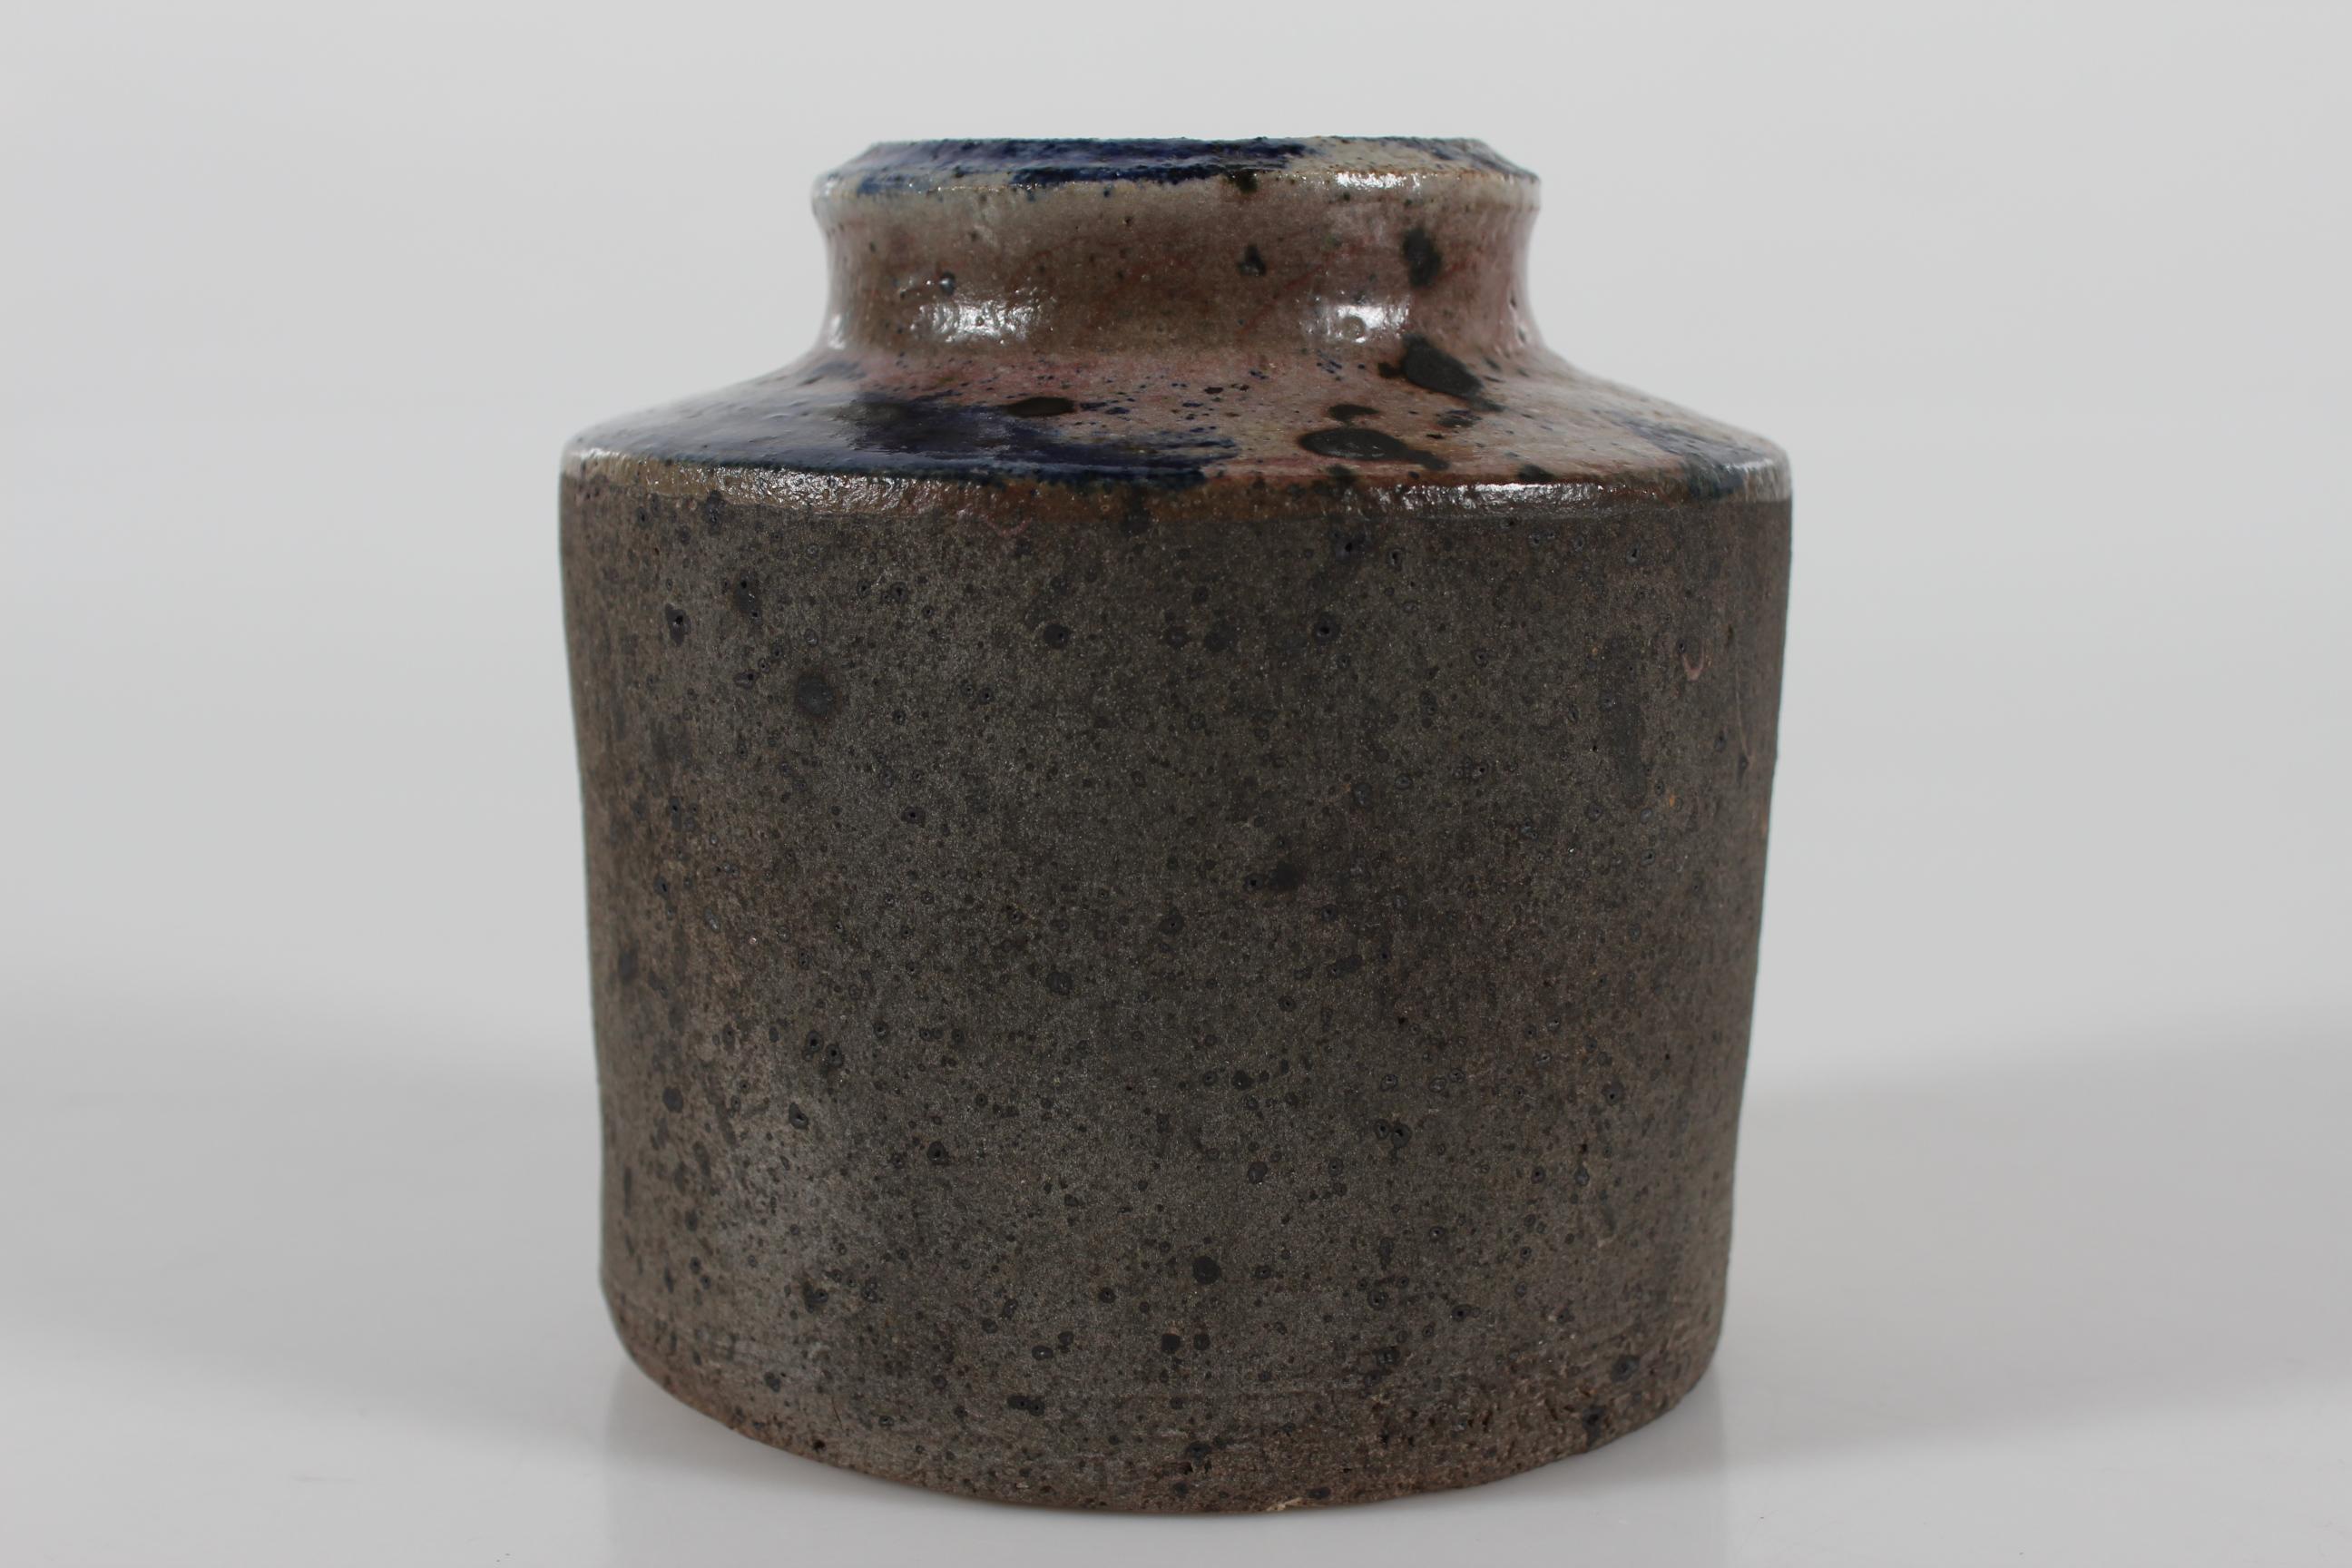 Danish Studio Ceramic Vase by Chris Moes Earth Tones with Speckles, 1970s For Sale 1